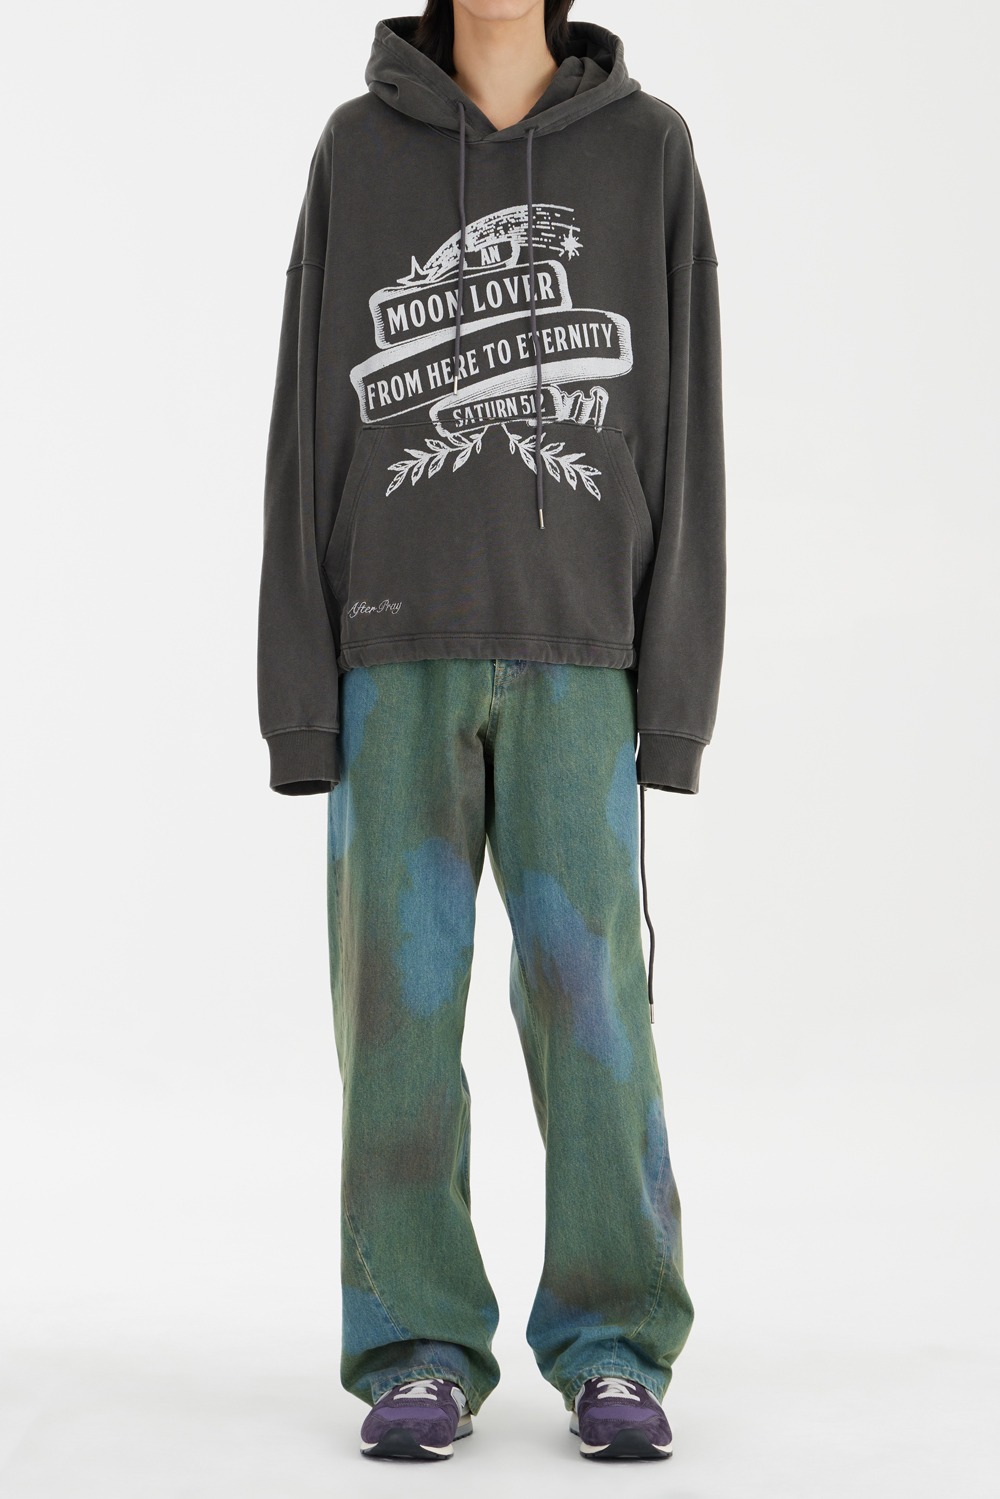 Universal Print Washed Sweat Suit Hoodie - Charcoal